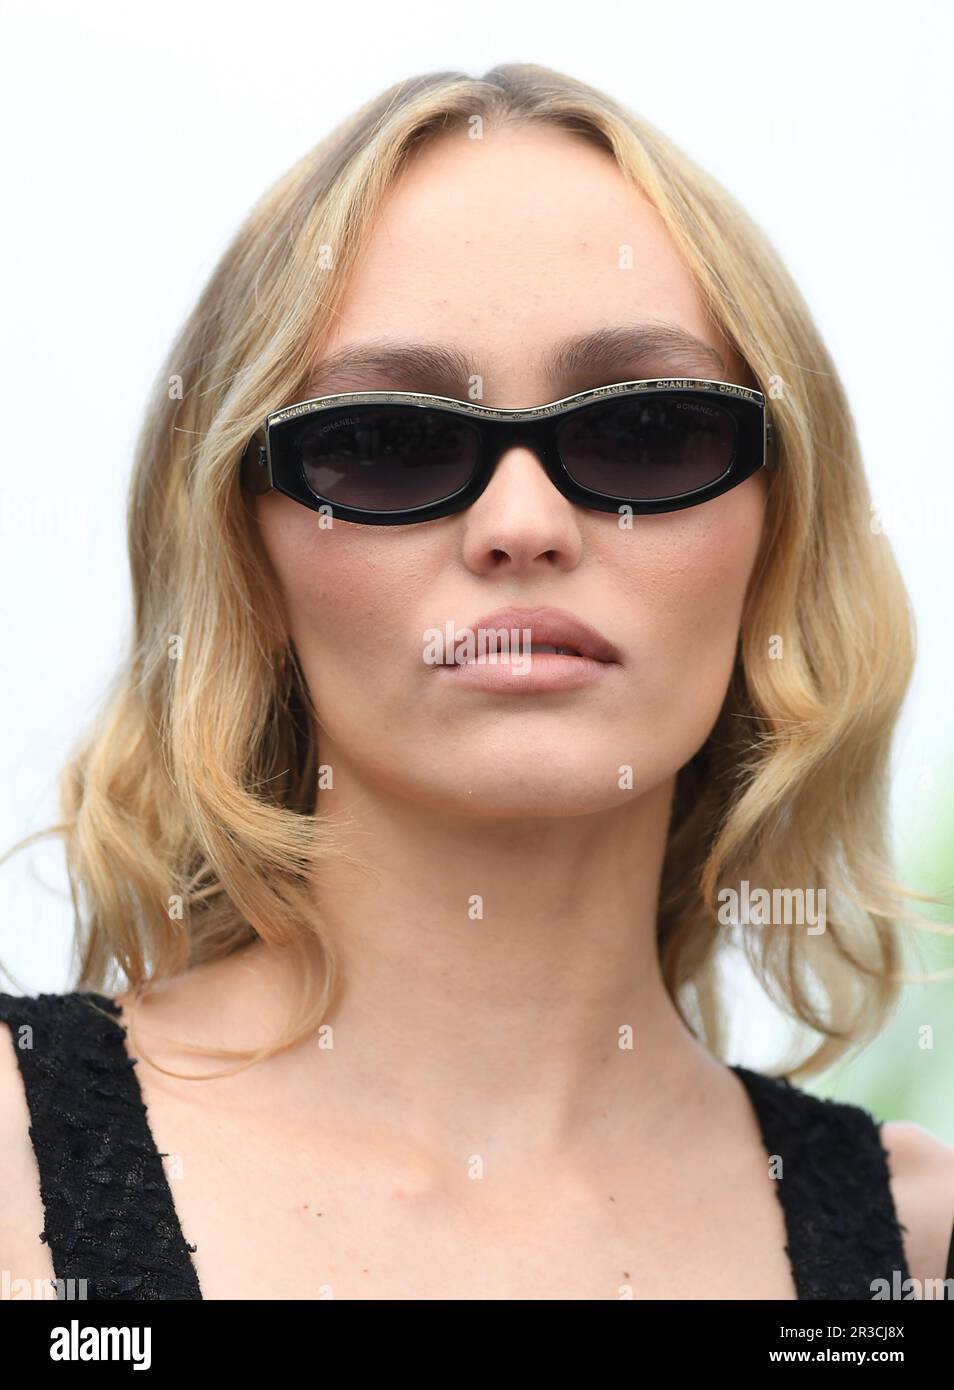 Cannes, France. 23rd May, 2023. American actress Lily-Rose Depp attends a  photo call for The Idol at the 76th Cannes Film Festival at Palais des  Festivals in Cannes, France on Tuesday, May